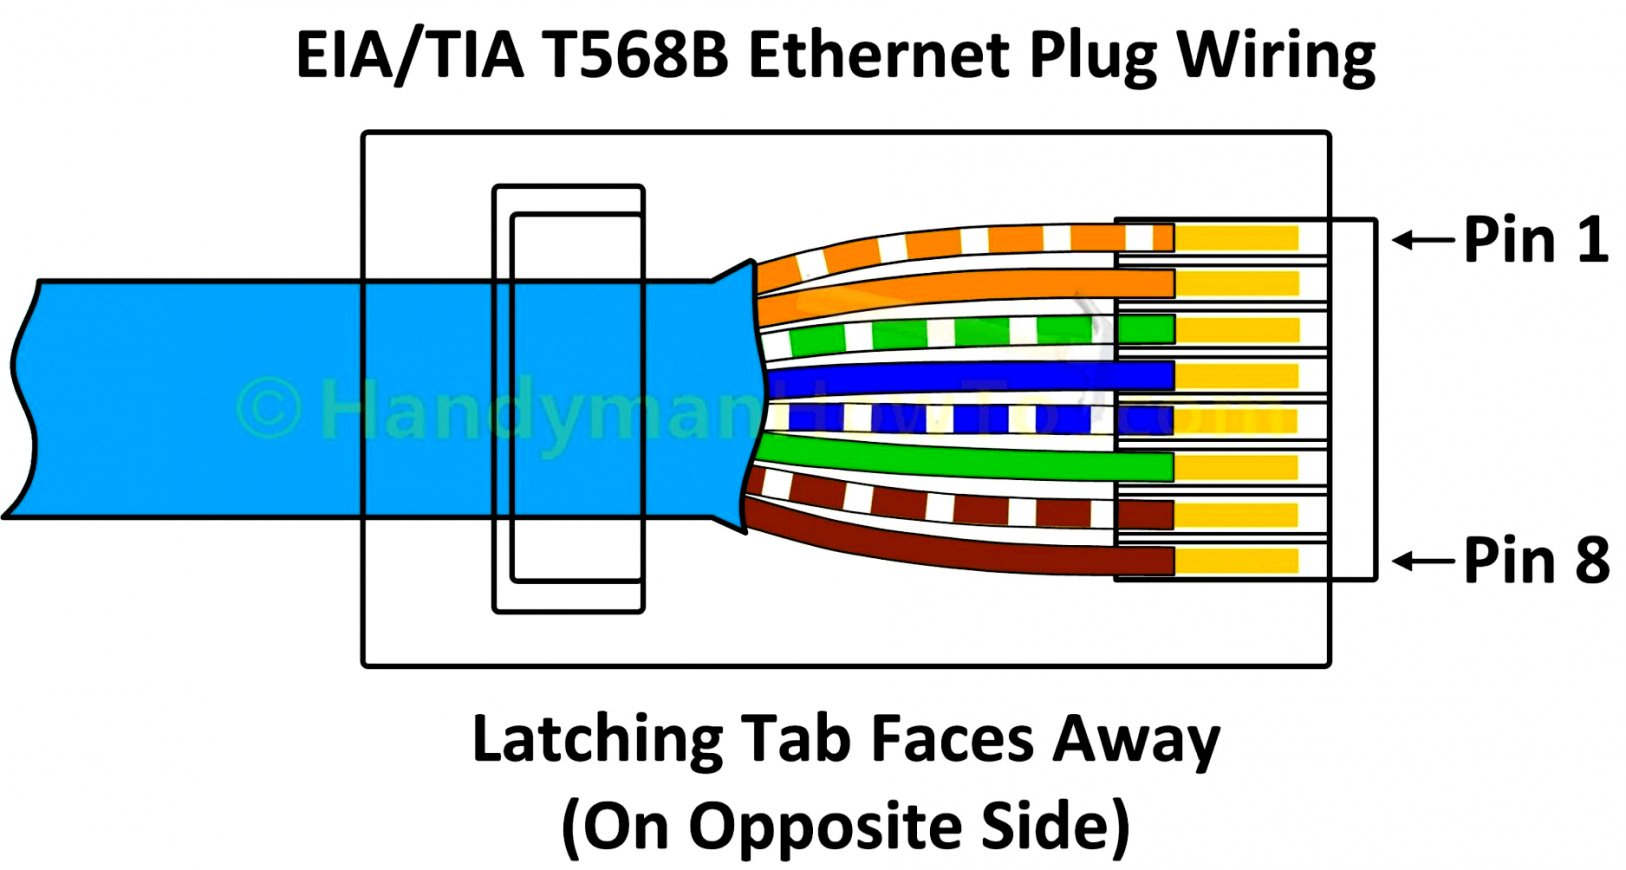 Cat5E Wiring Diagram Wall | Wiring Diagram - Cat 6 Wiring Diagram For Wall Plates